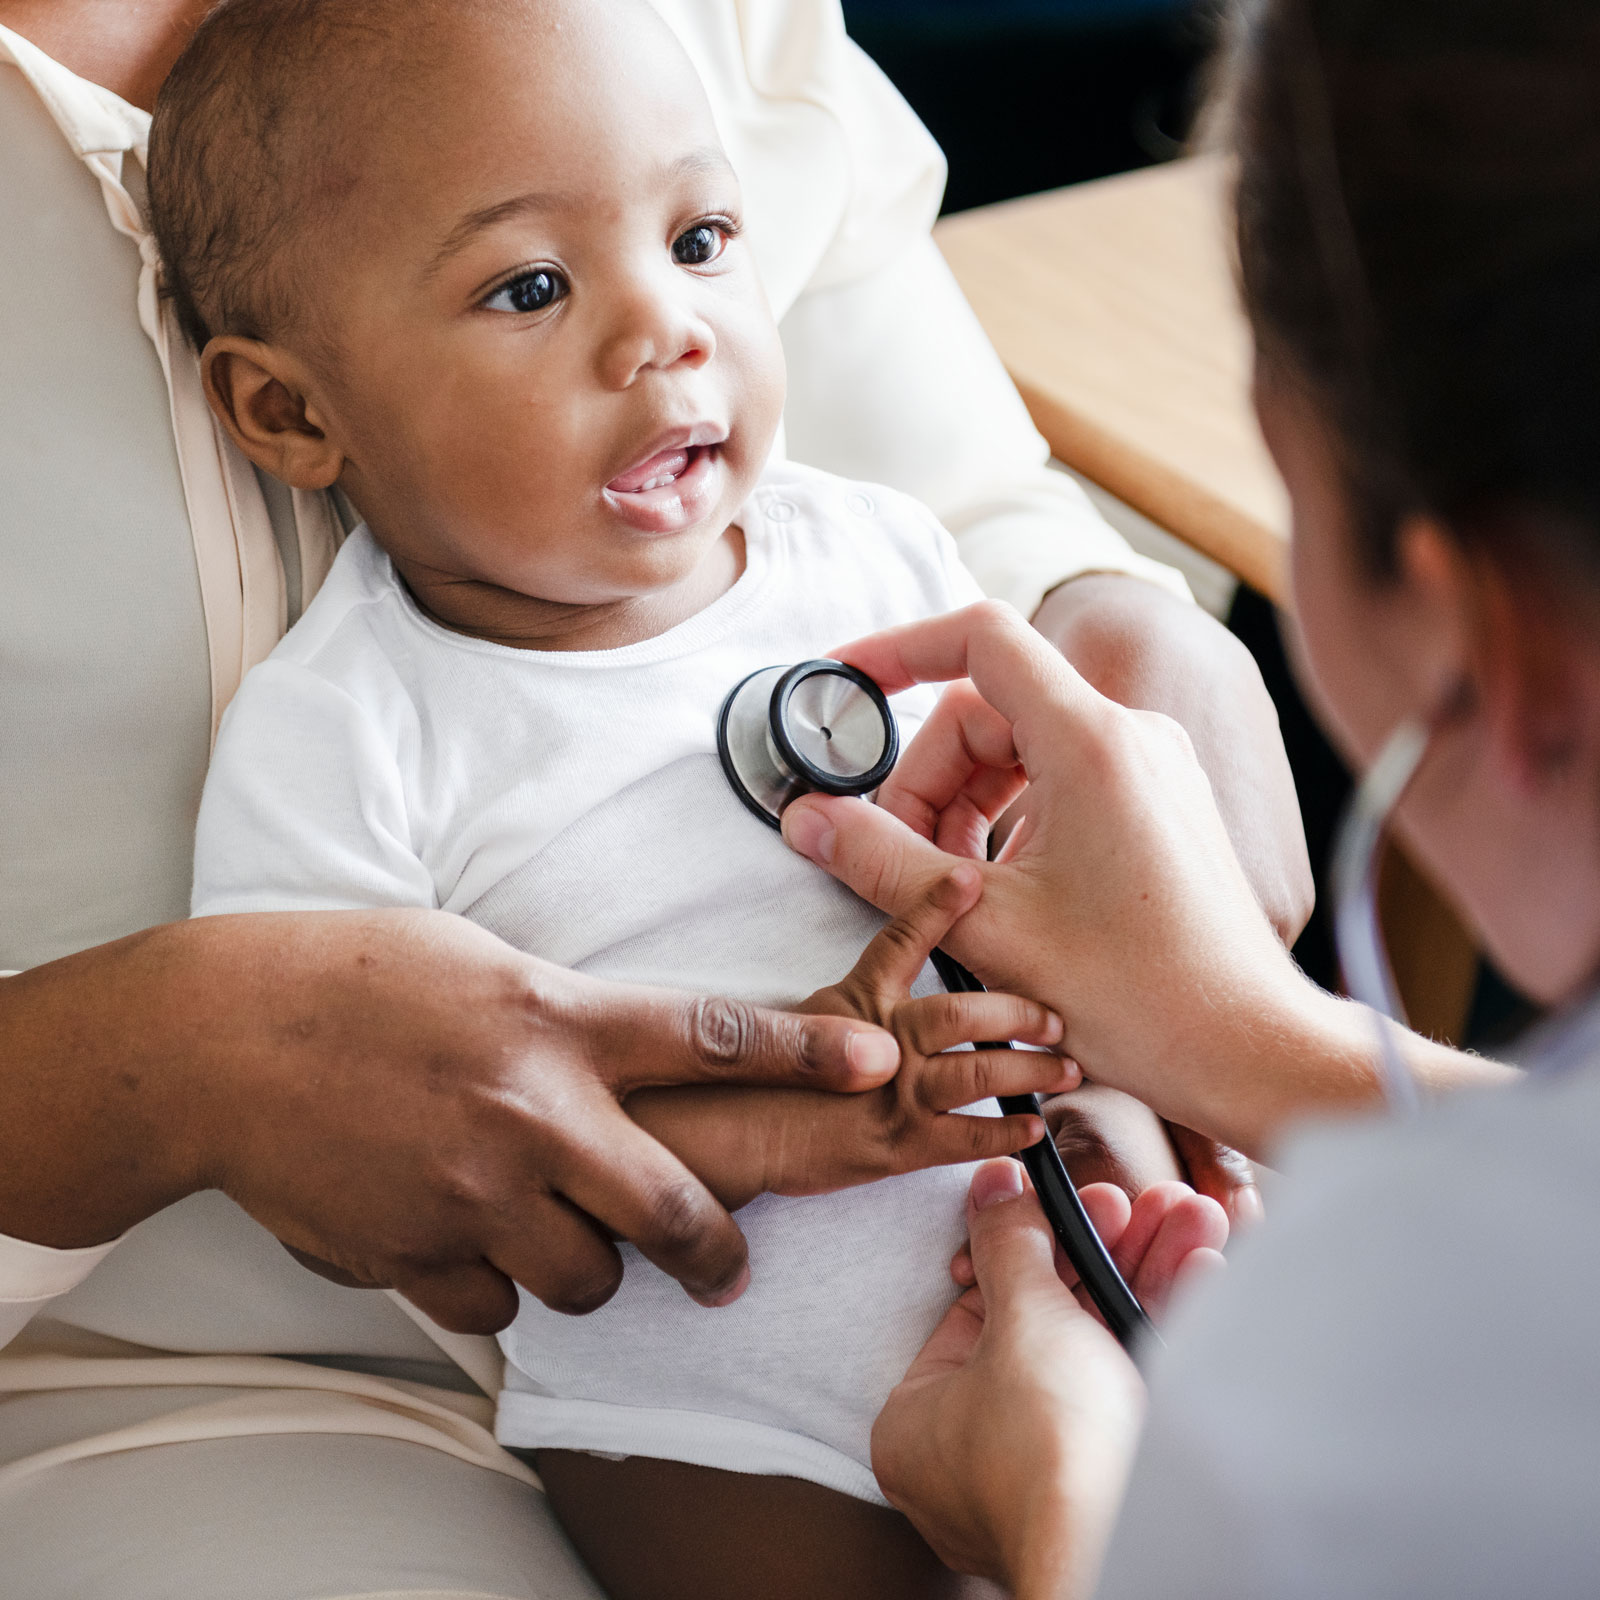 a pediatrician listens to a baby's heart using a stethoscope